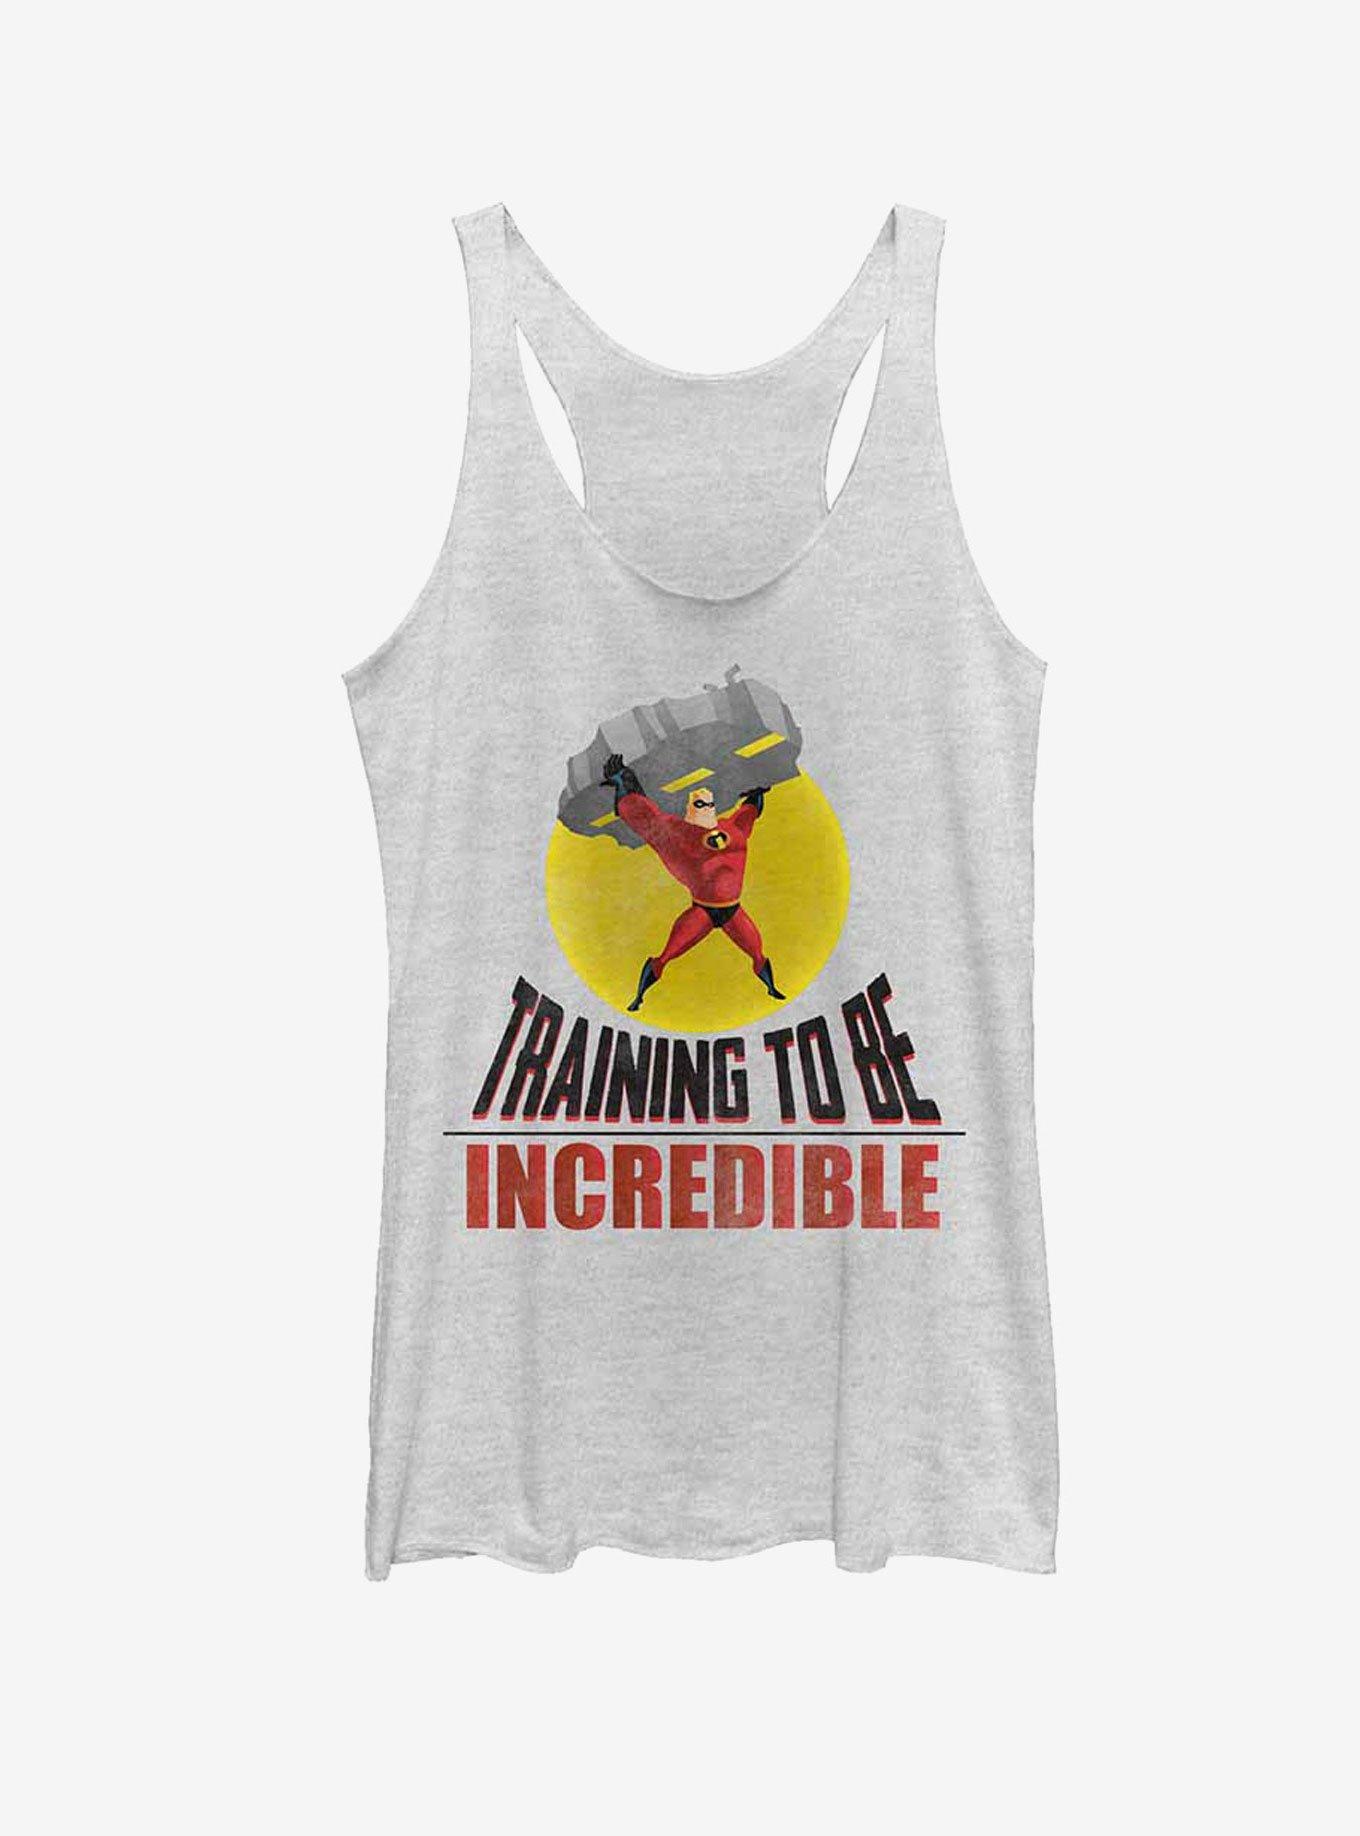 Disney Pixar The Incredibles Training To Be Incredible Womens Tank, WHITE HTR, hi-res